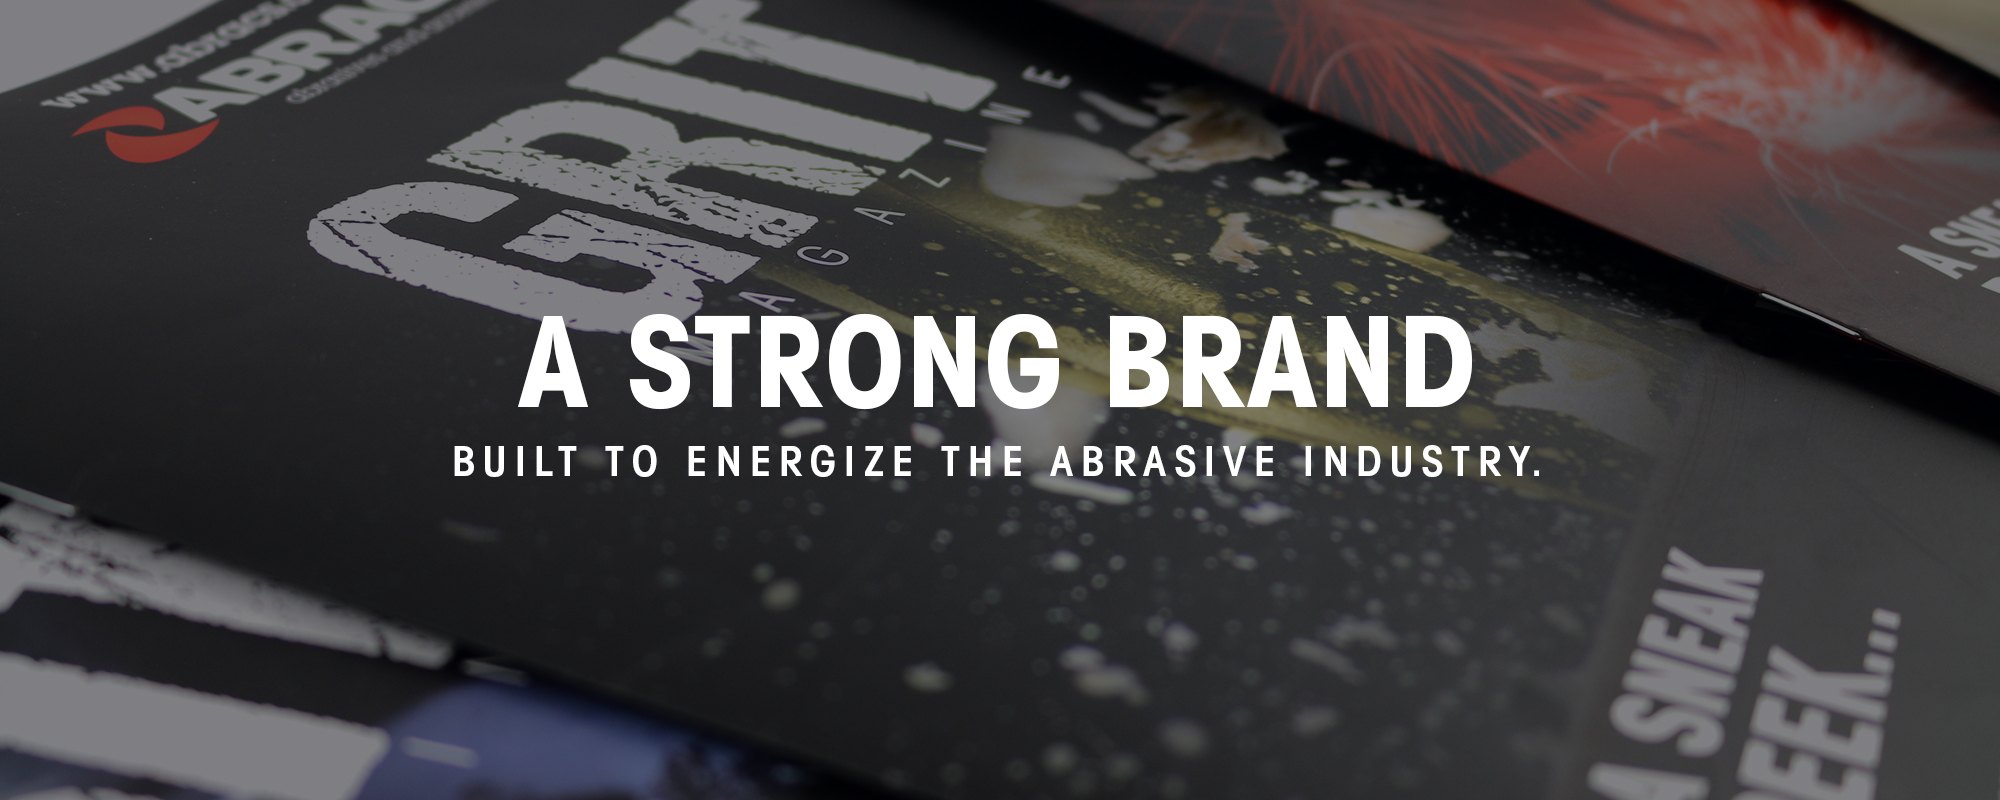 A Strong Brand built to energise the abrasives industry